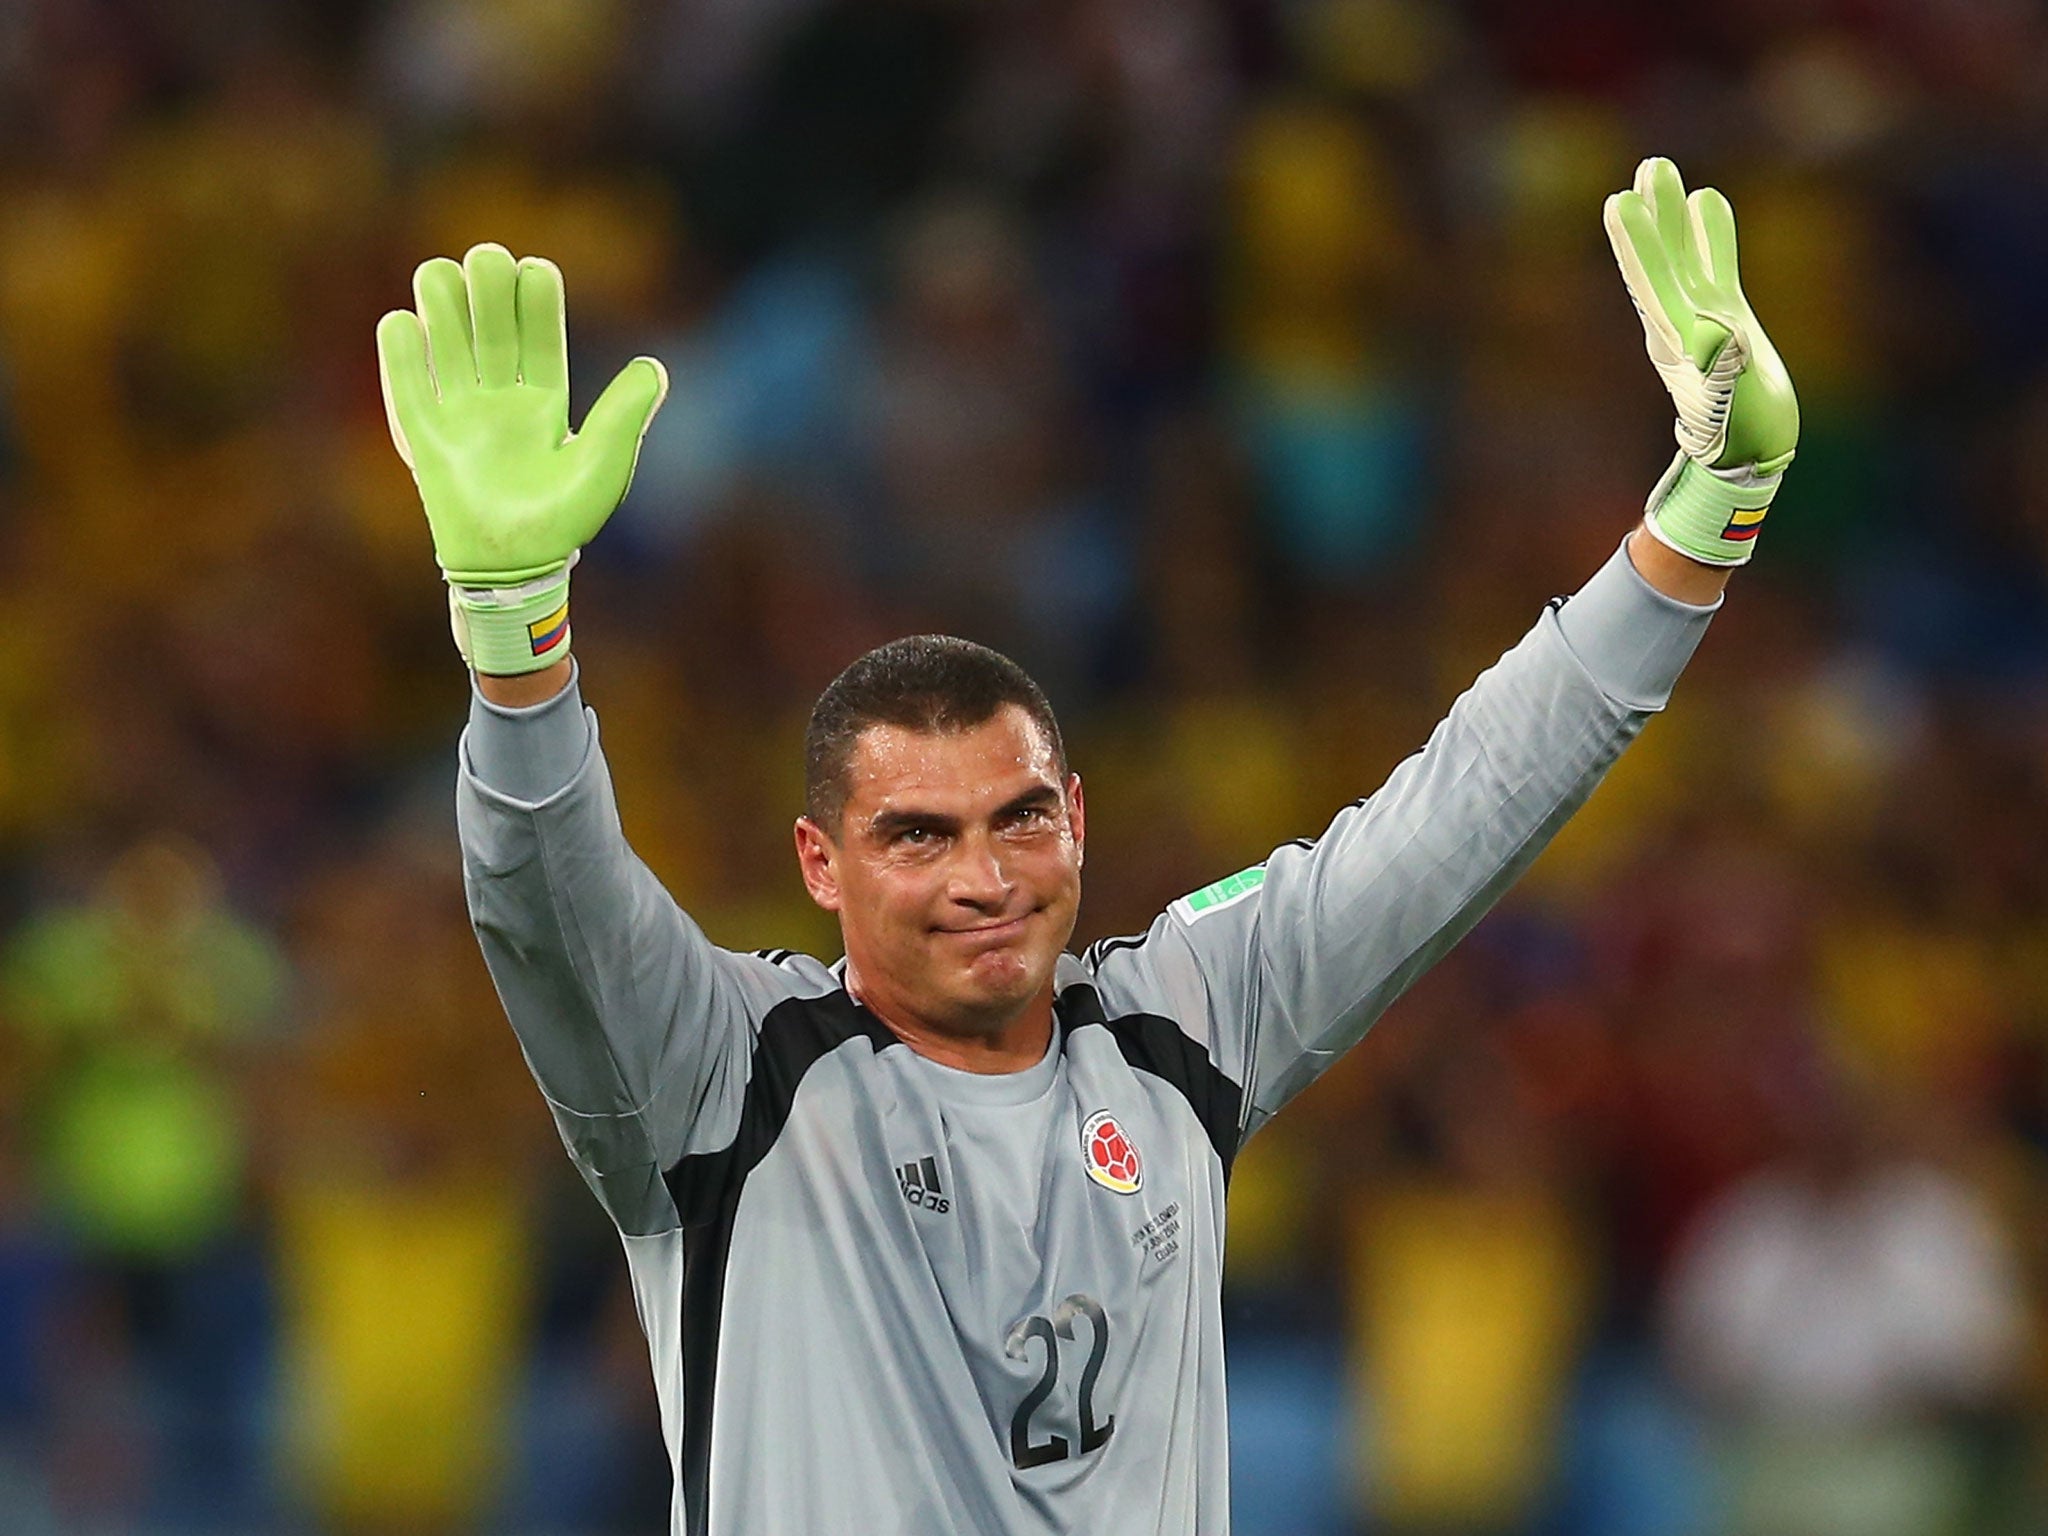 Goalkeeper Faryd Mondragon of Colombia acknowledges the fans